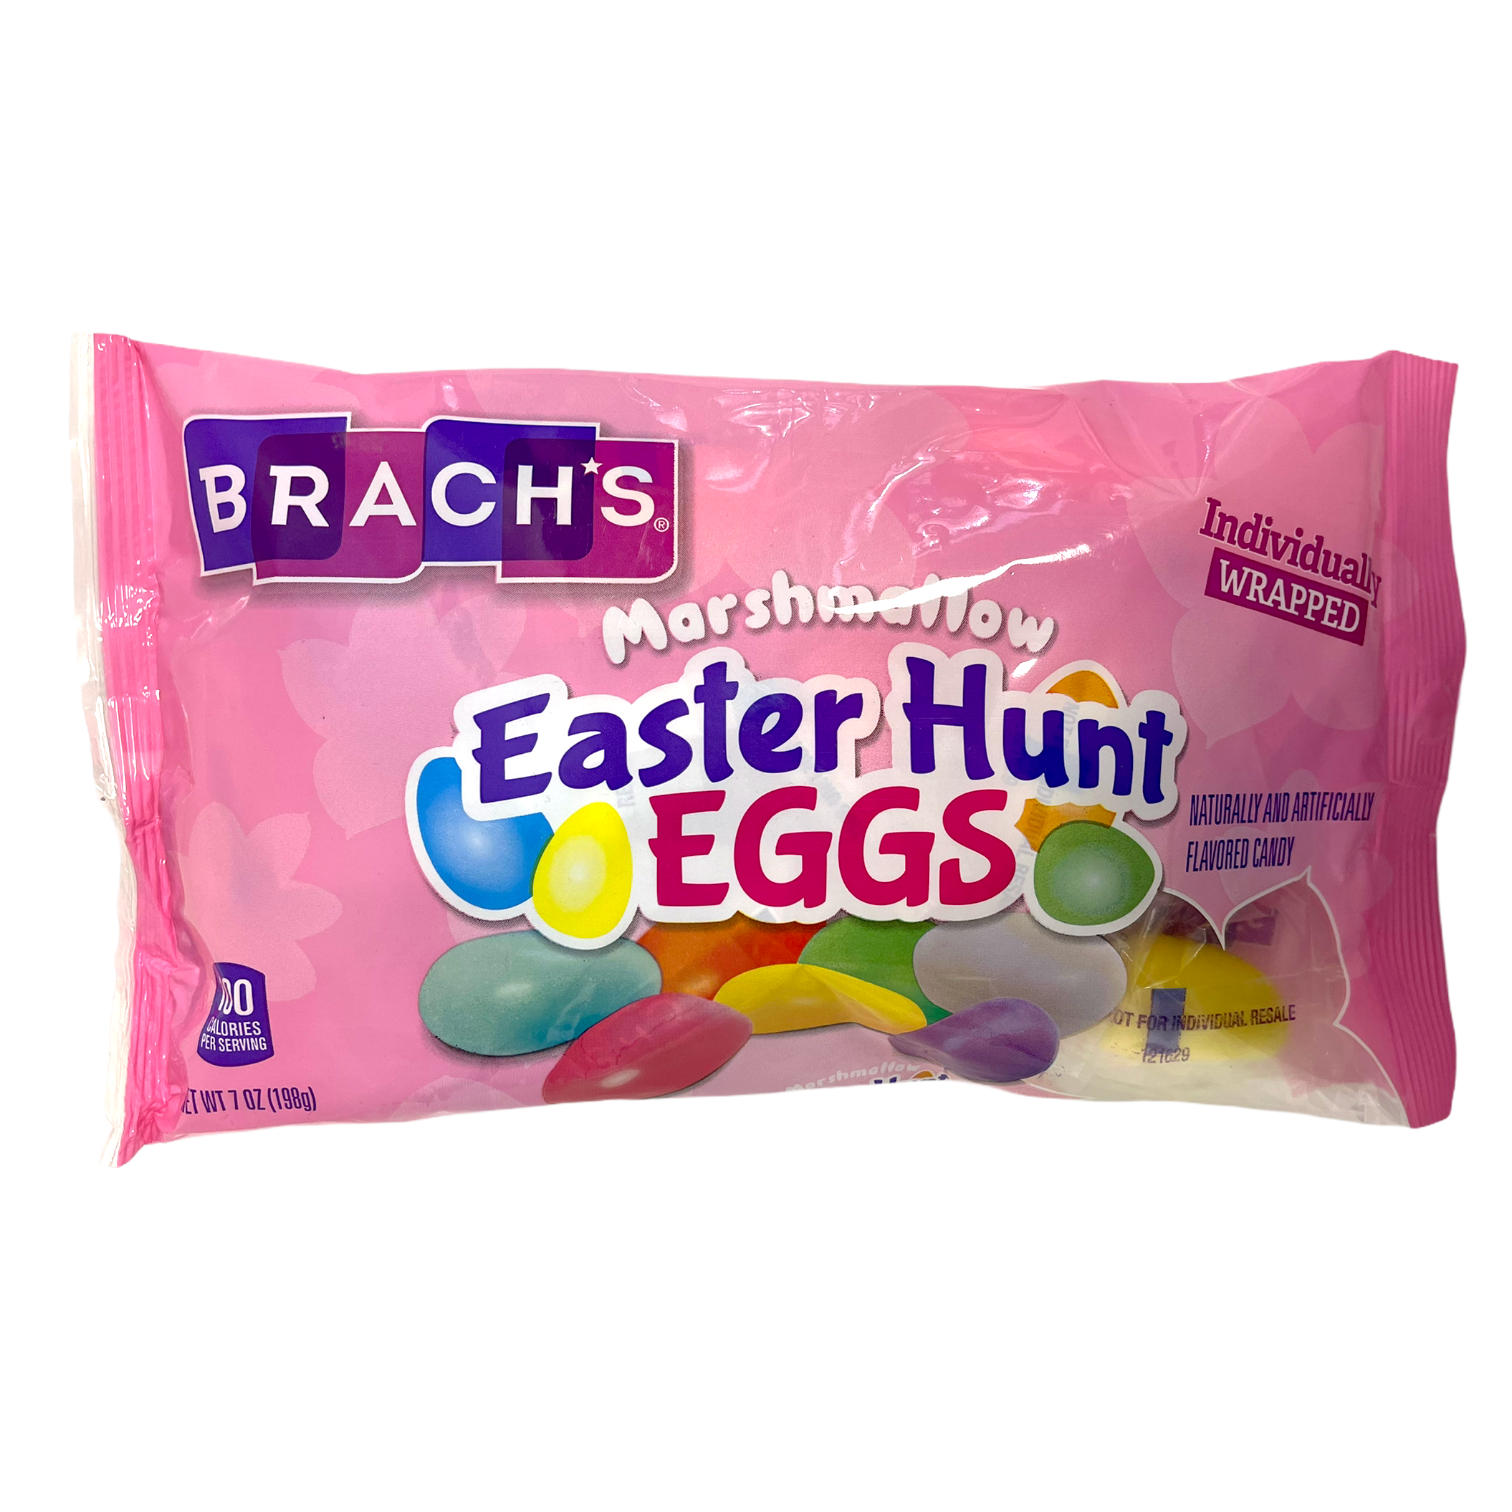 Brach's Marshmallow Easter Hunt Eggs Candy 198g sold by American Grocer in the UK